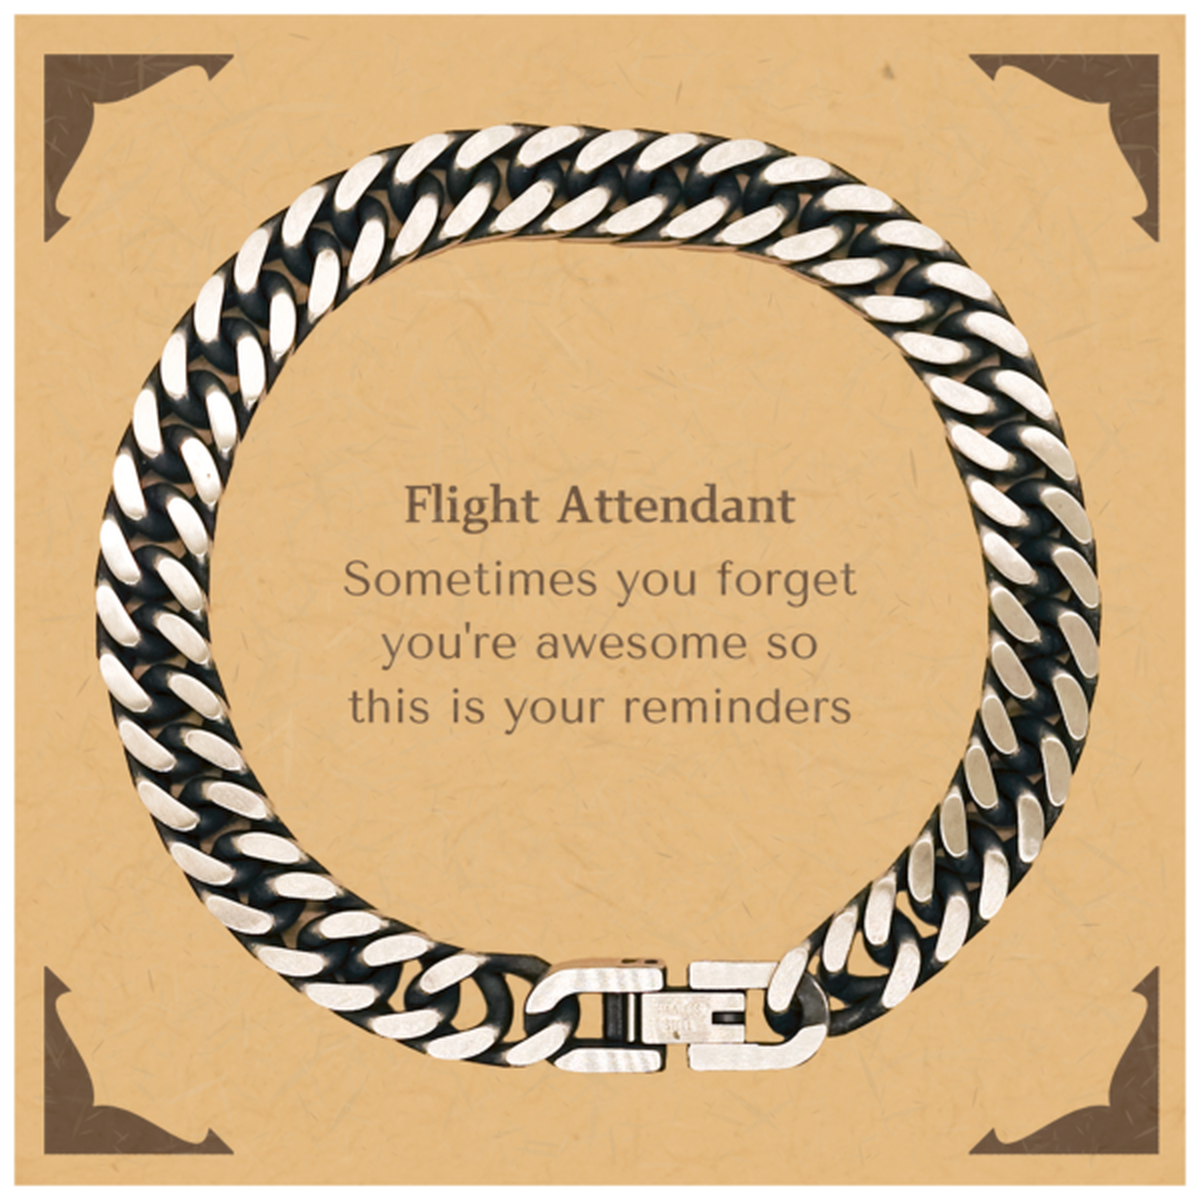 Sentimental Flight Attendant Cuban Link Chain Bracelet, Flight Attendant Sometimes you forget you're awesome so this is your reminders, Graduation Christmas Birthday Gifts for Flight Attendant, Men, Women, Coworkers